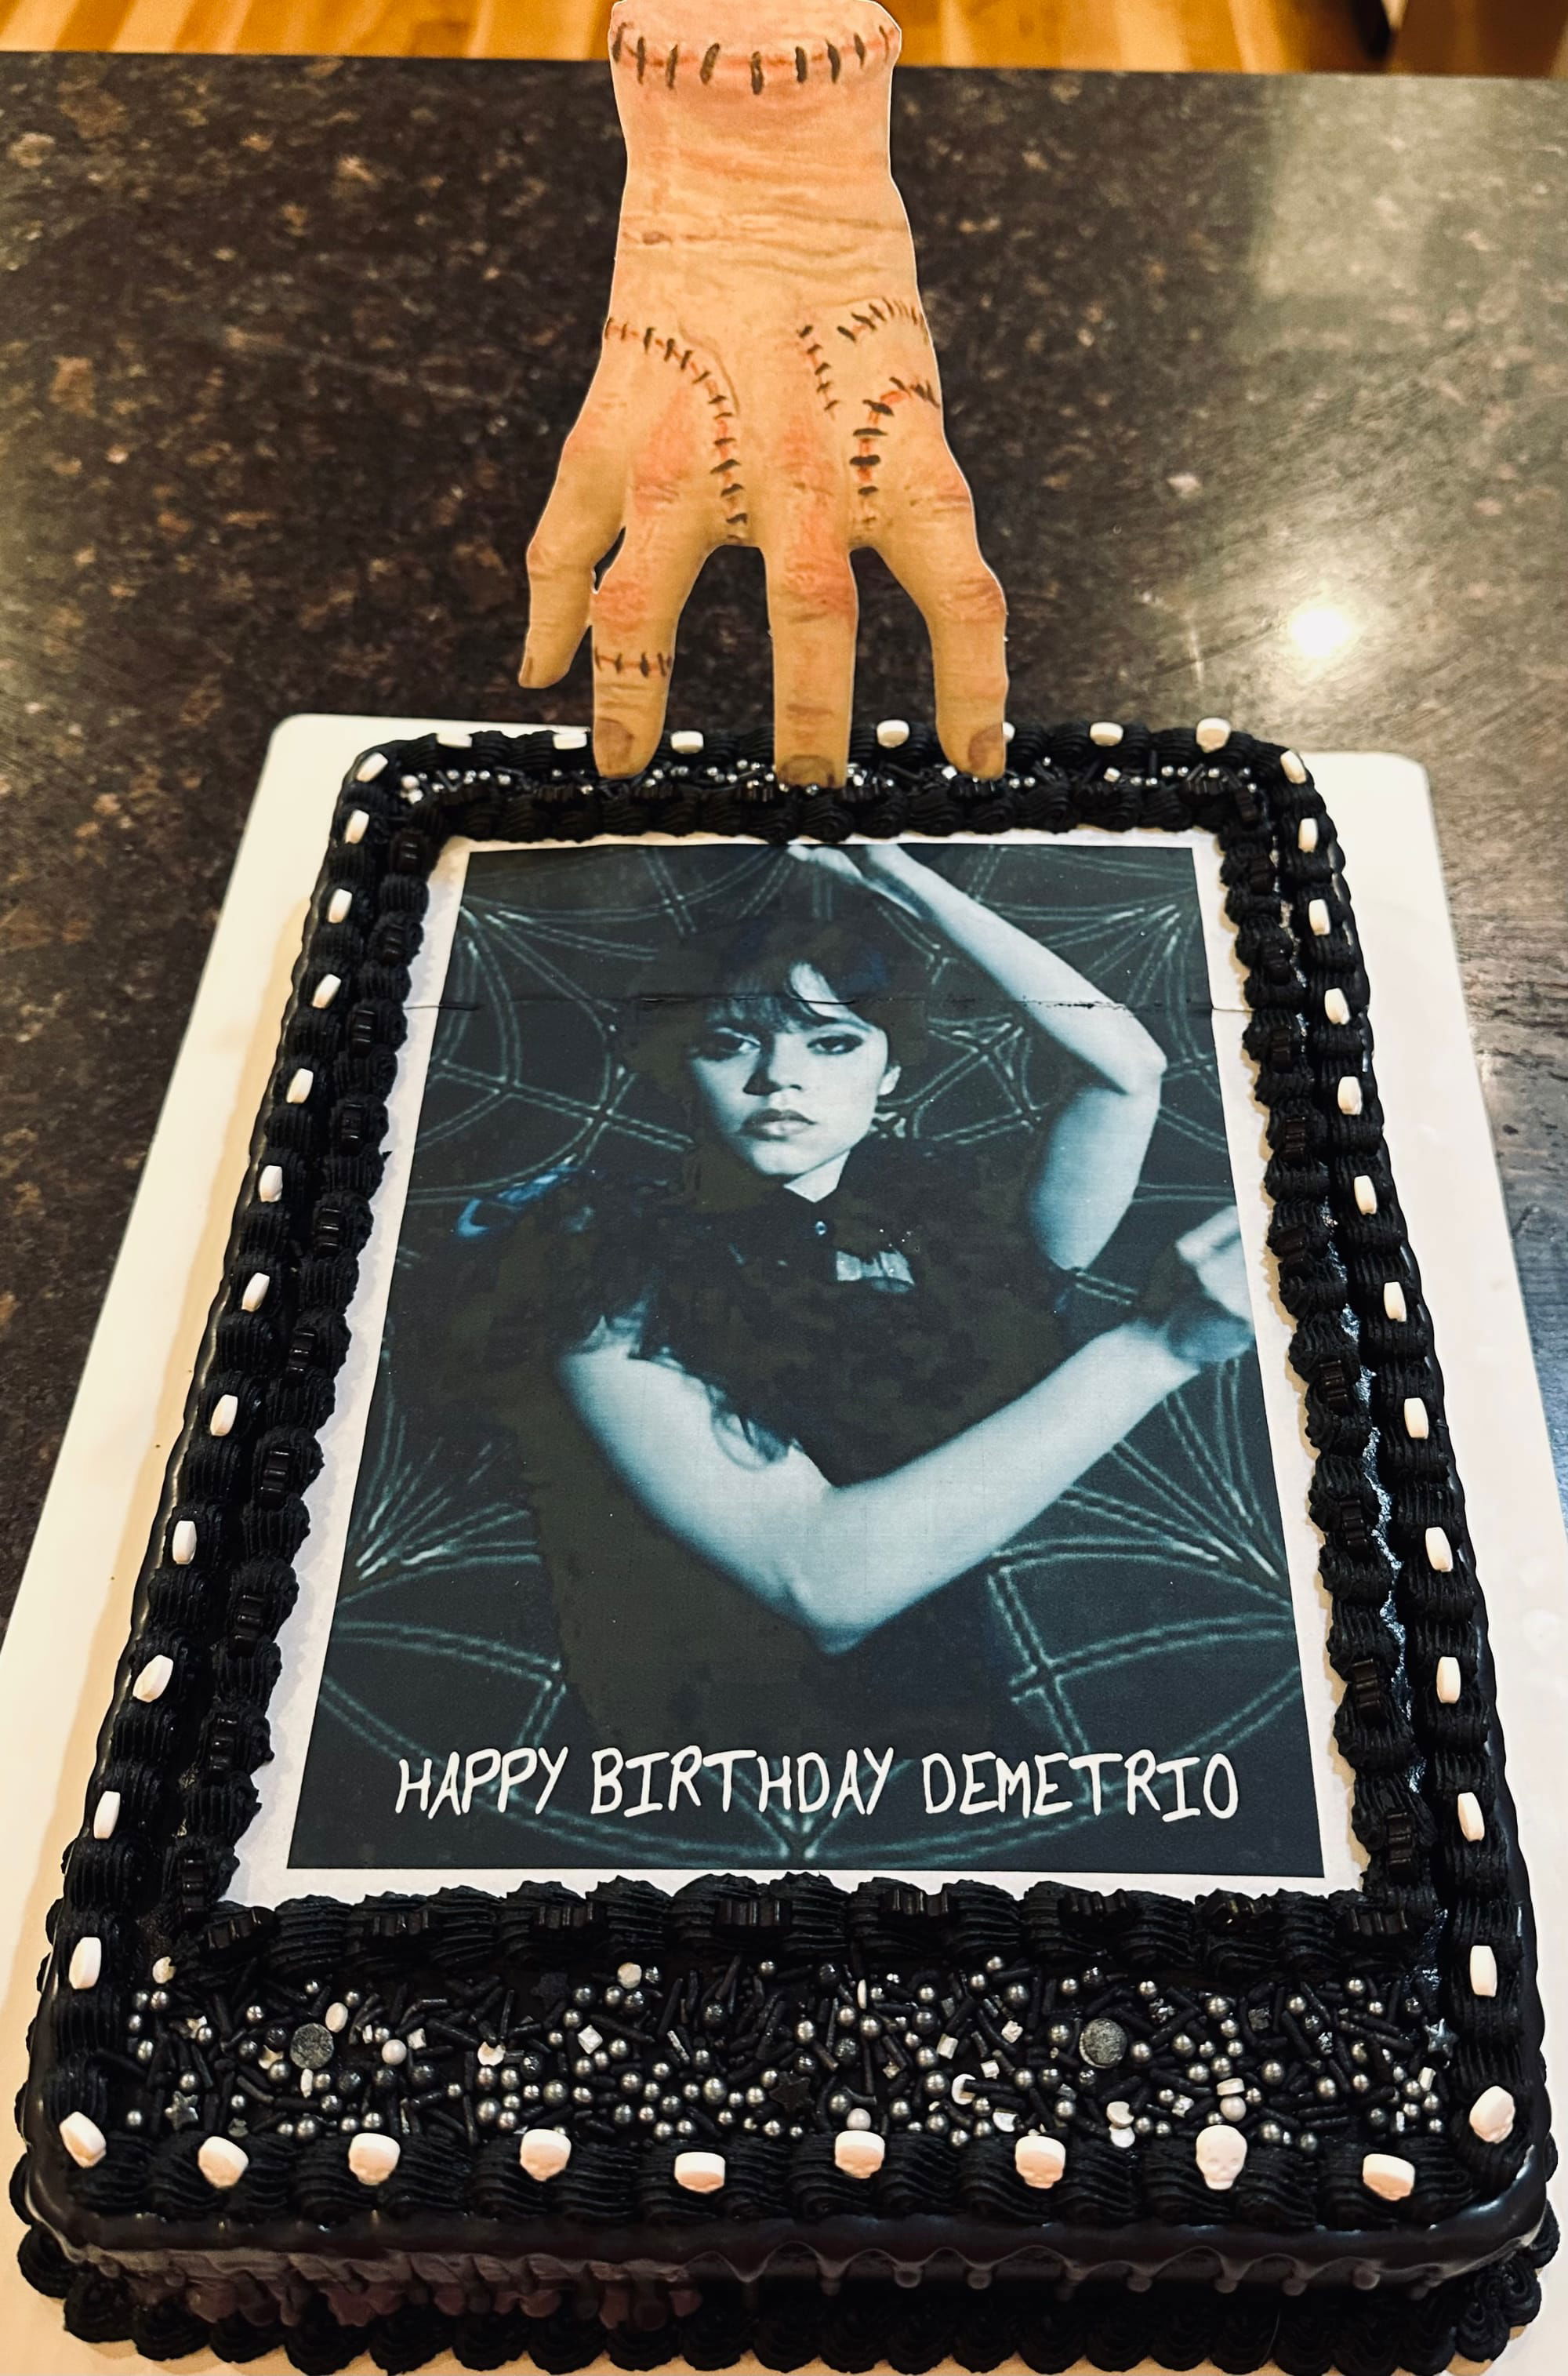 Wednesday Addams Chocolate Sheet Cake with Buttercream Frosting and Edible Image